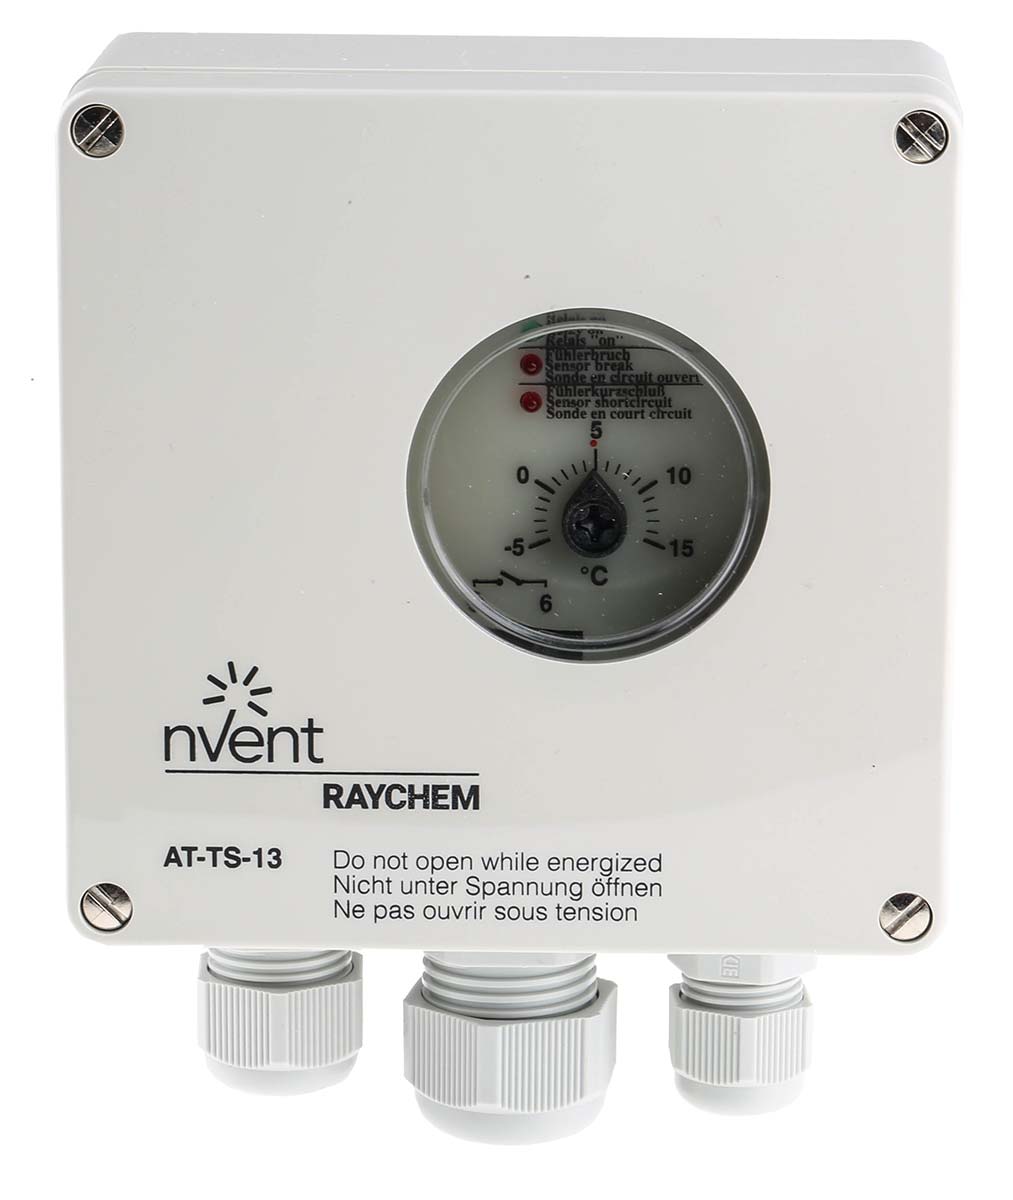 nVent RAYCHEM Trace Heating Thermostat, -5 → +15 °C